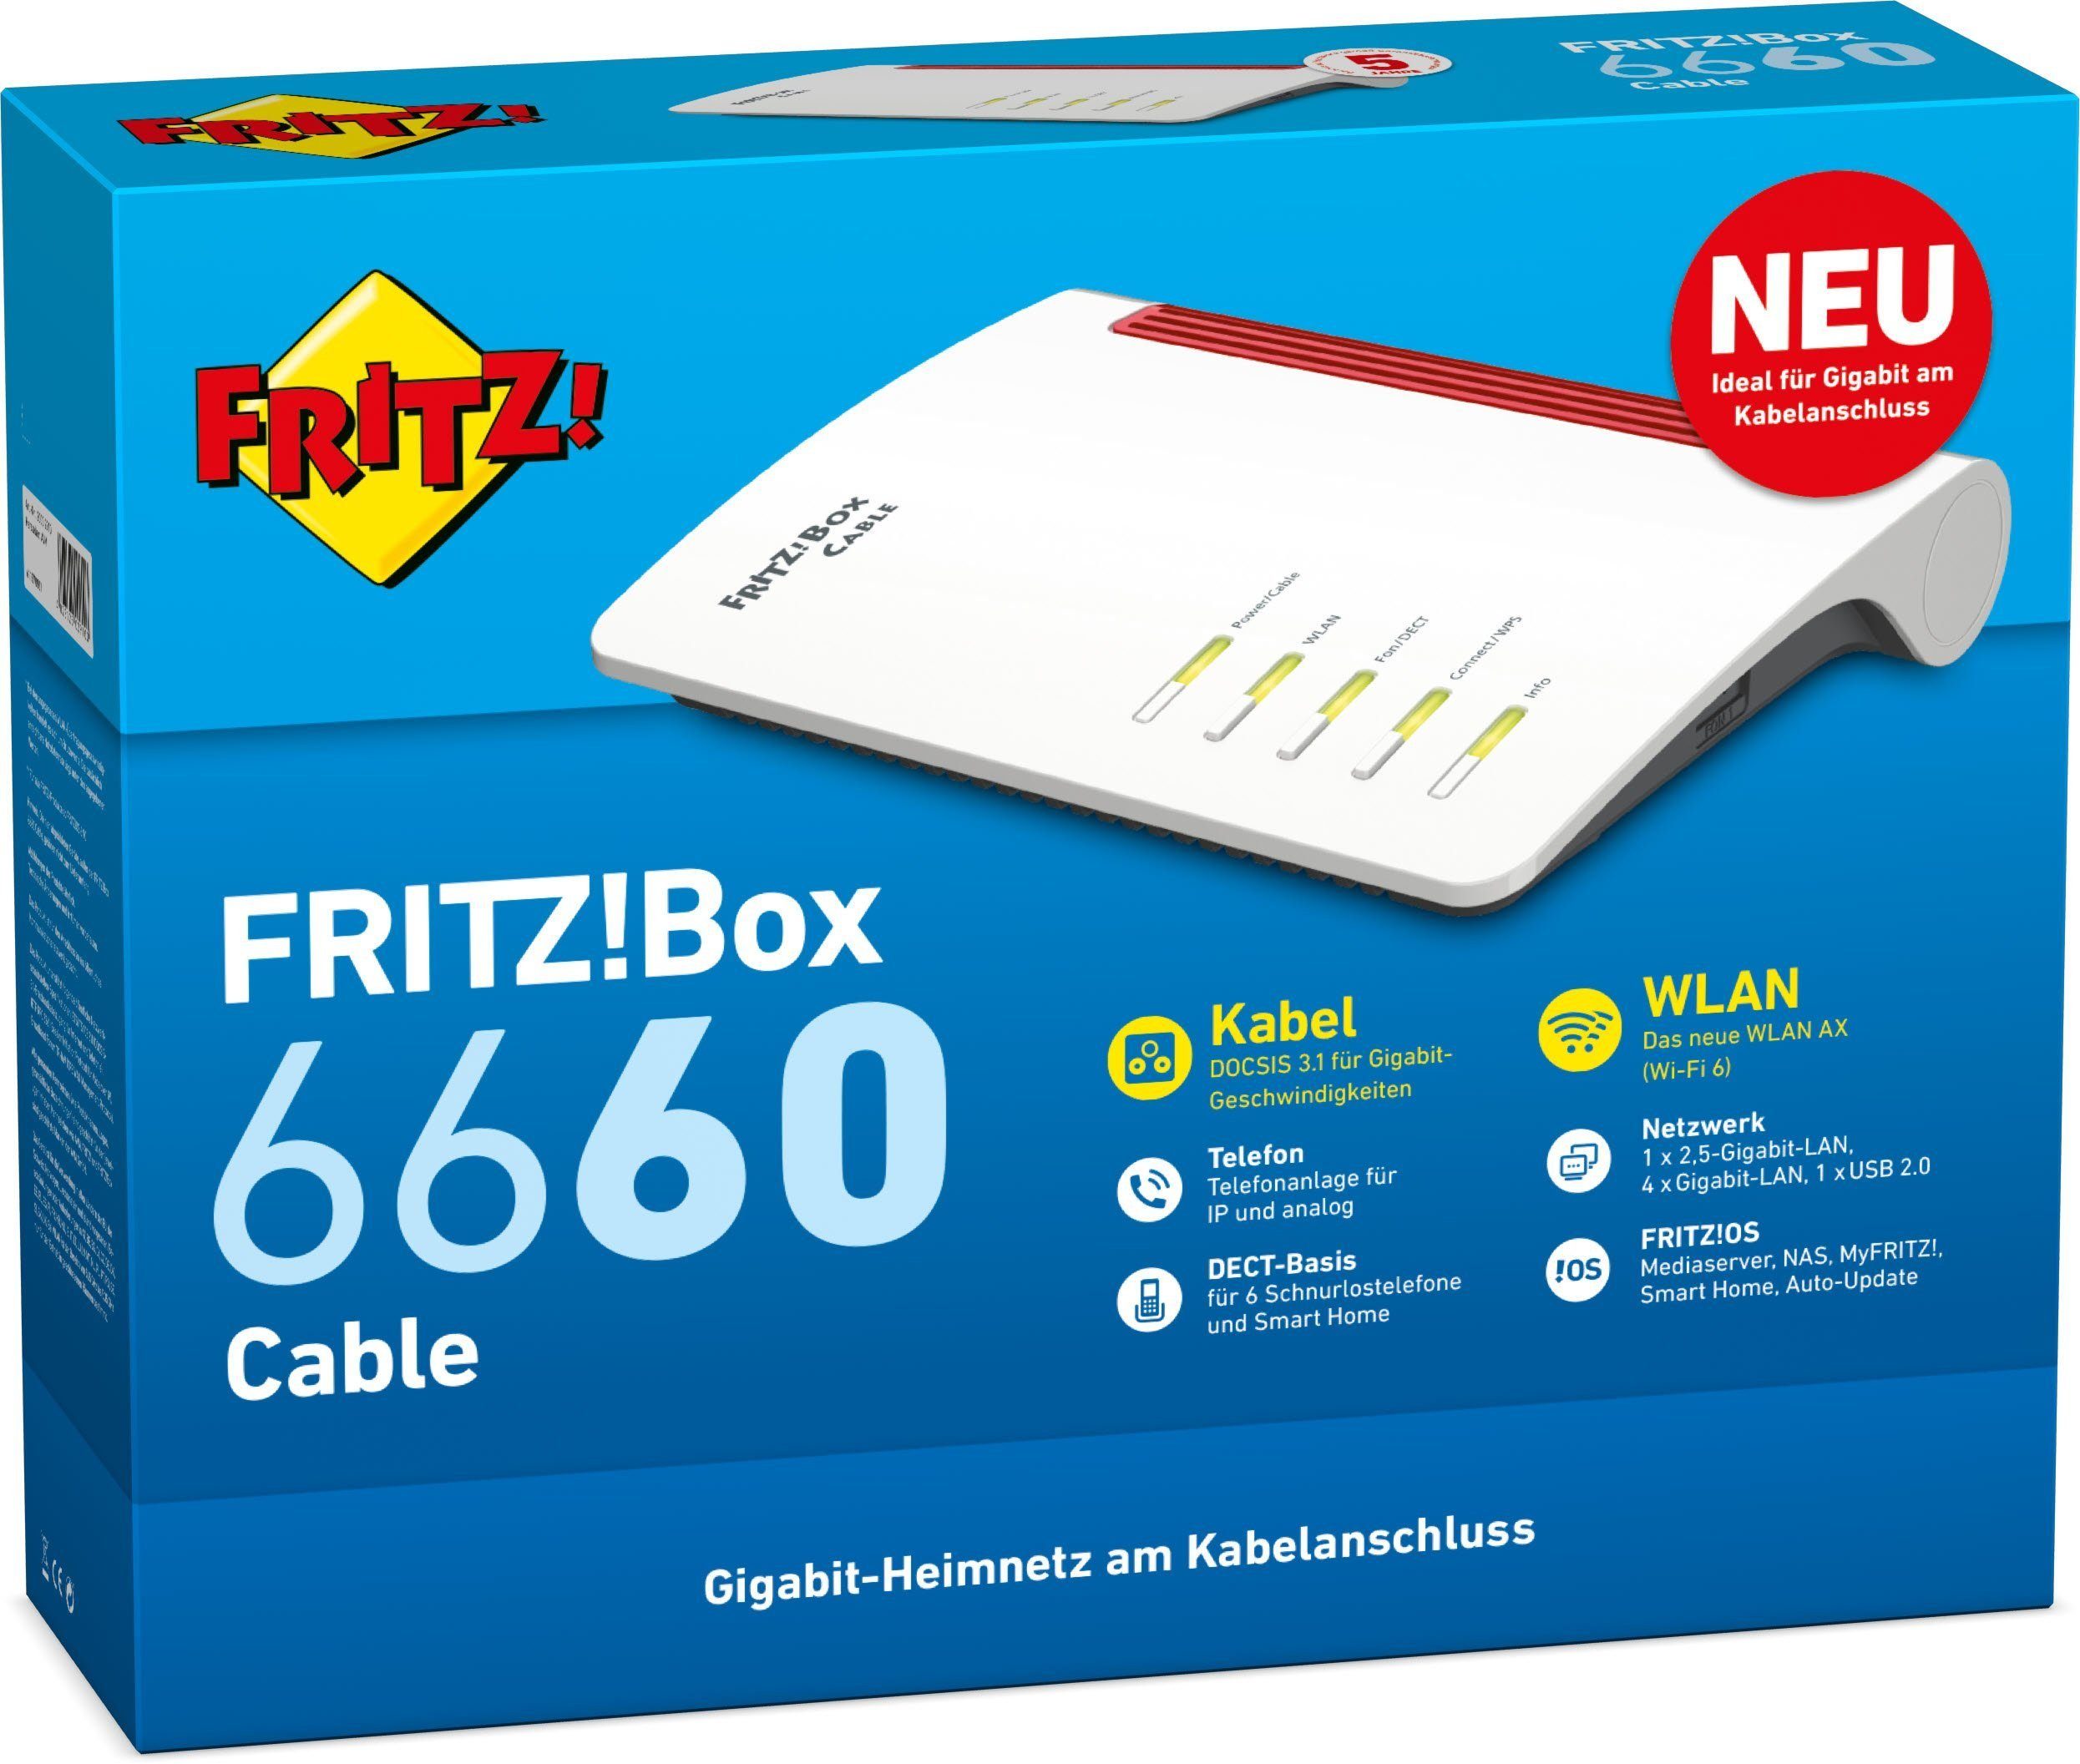 WLAN-Router Cable 6660 FRITZ!Box AVM